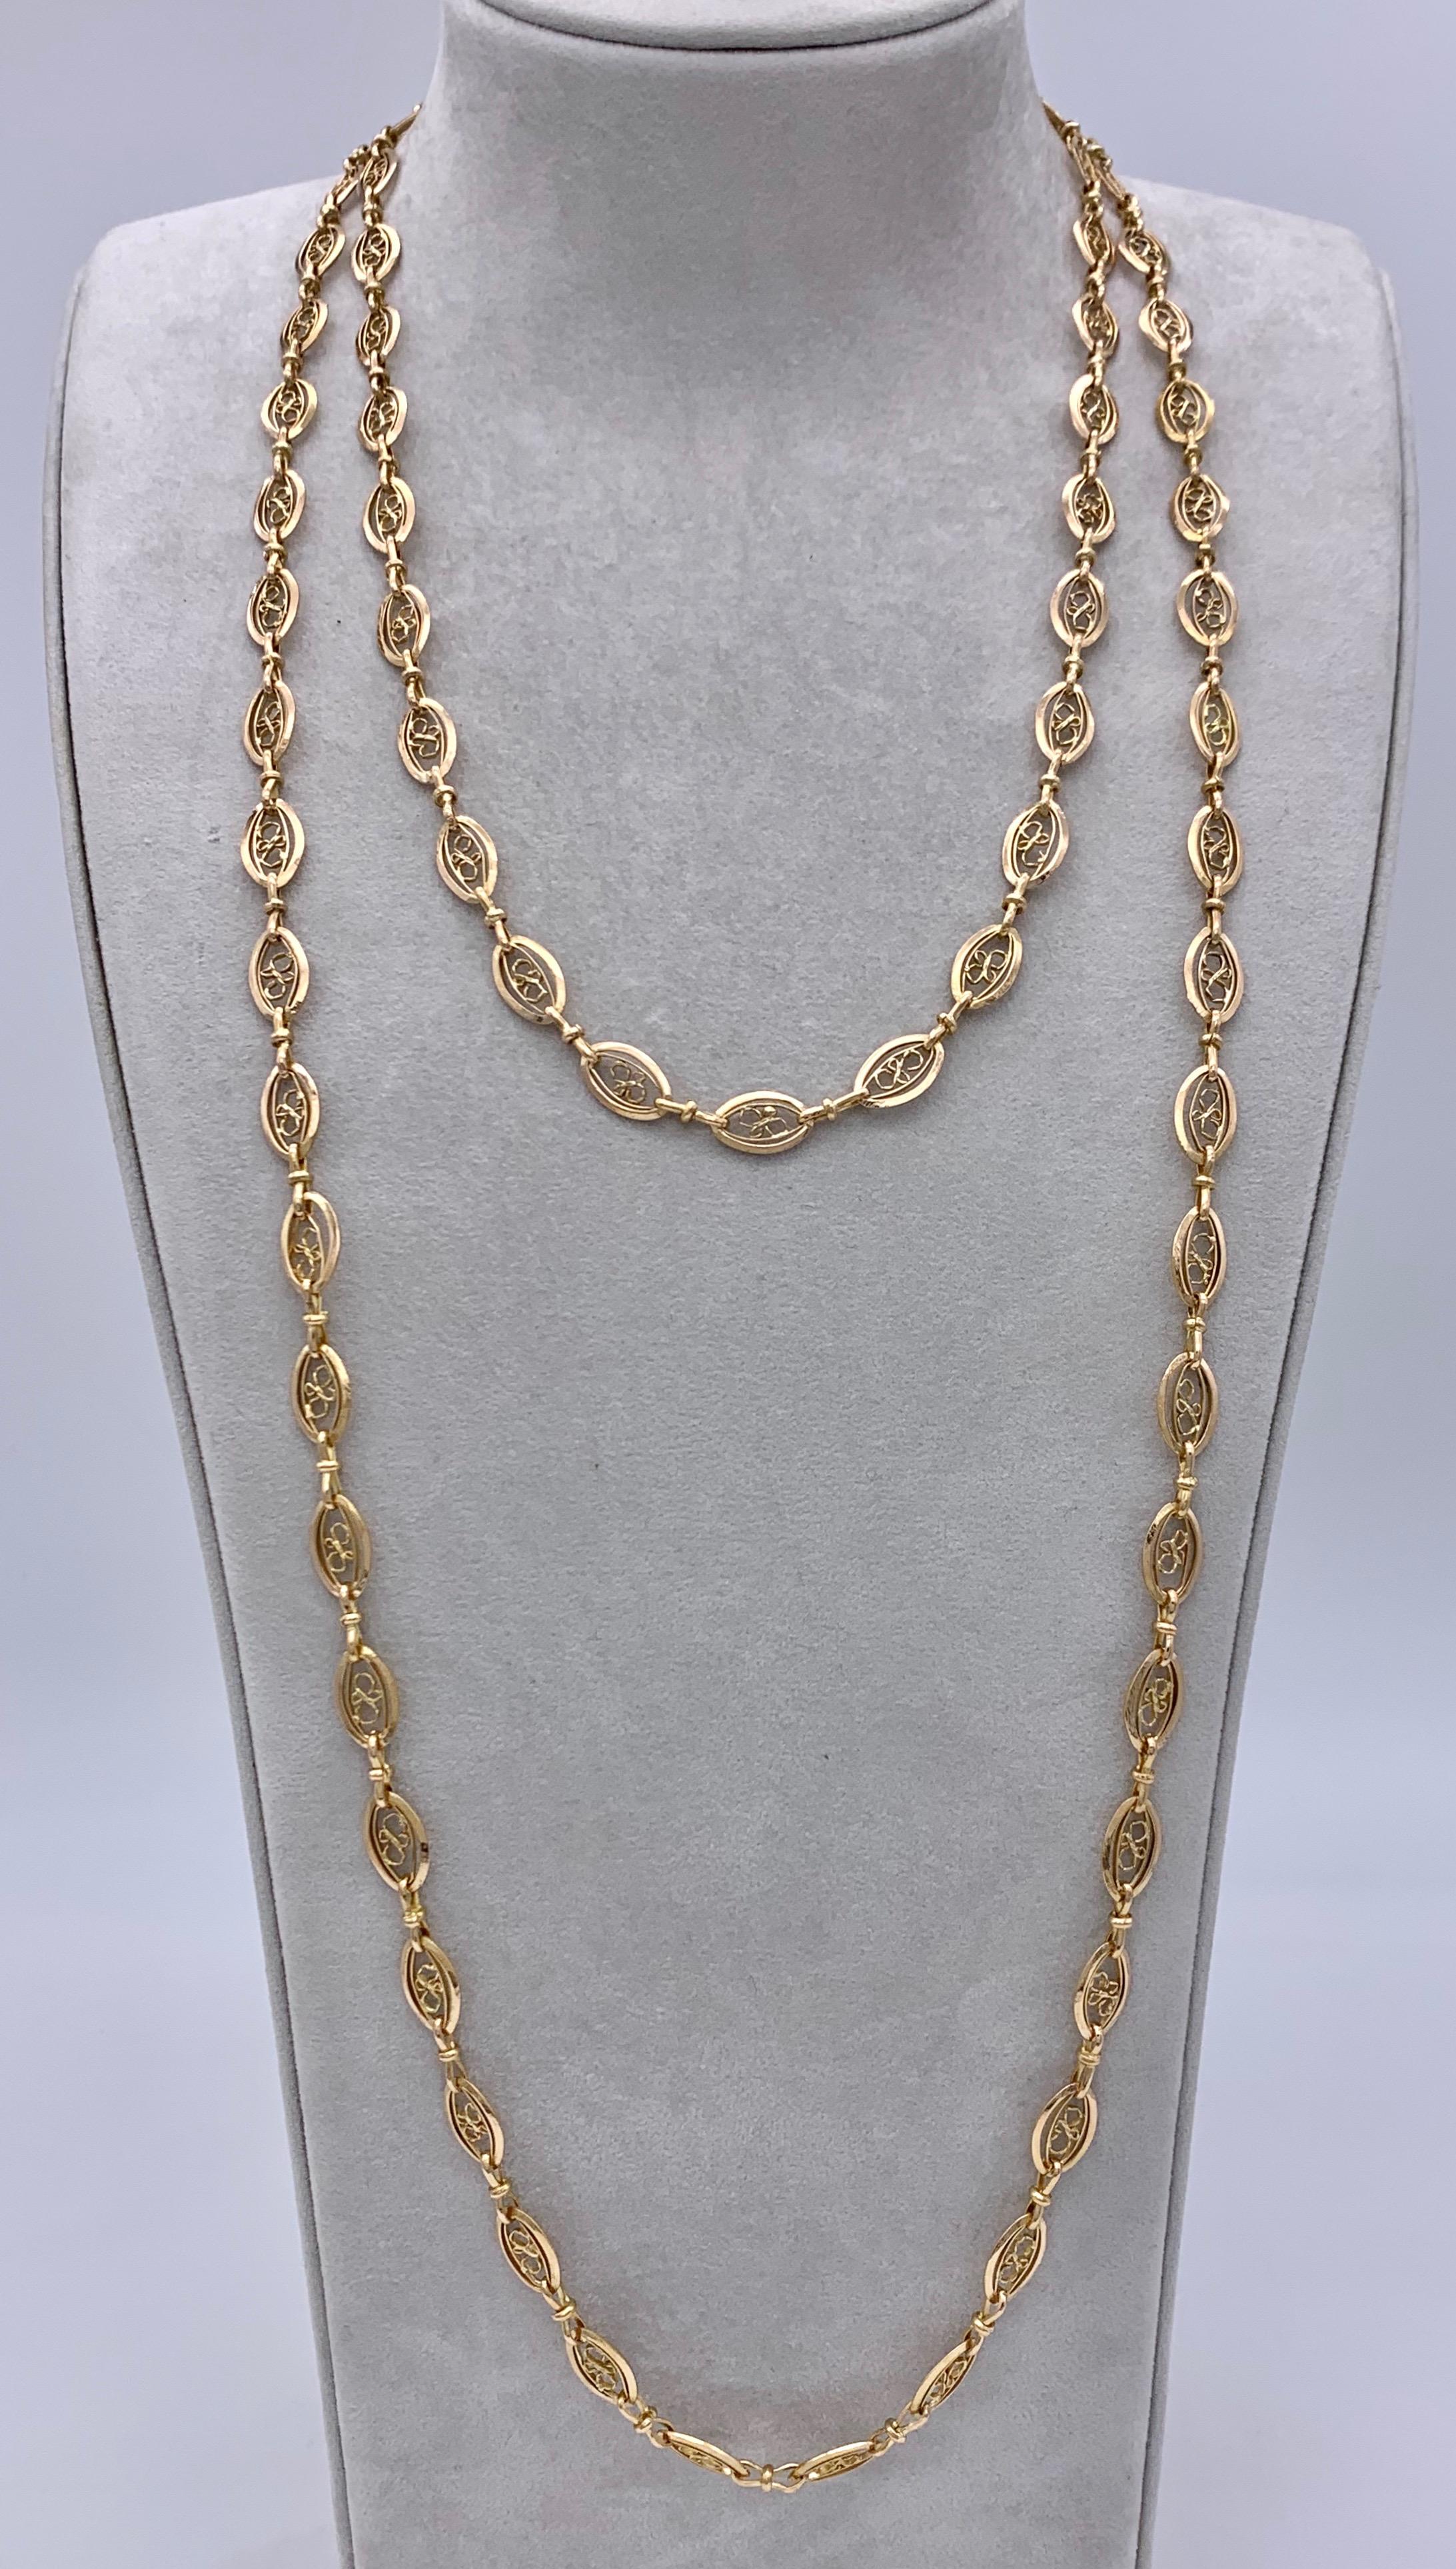 Beautiful French Bel Époque 18 karat gold sautoir made out of oval links. Each link is composed of one larger and one smaller oval link. The centre of the smaller oval is decorated with an ornament made of gold wire. The ovals are joined by links